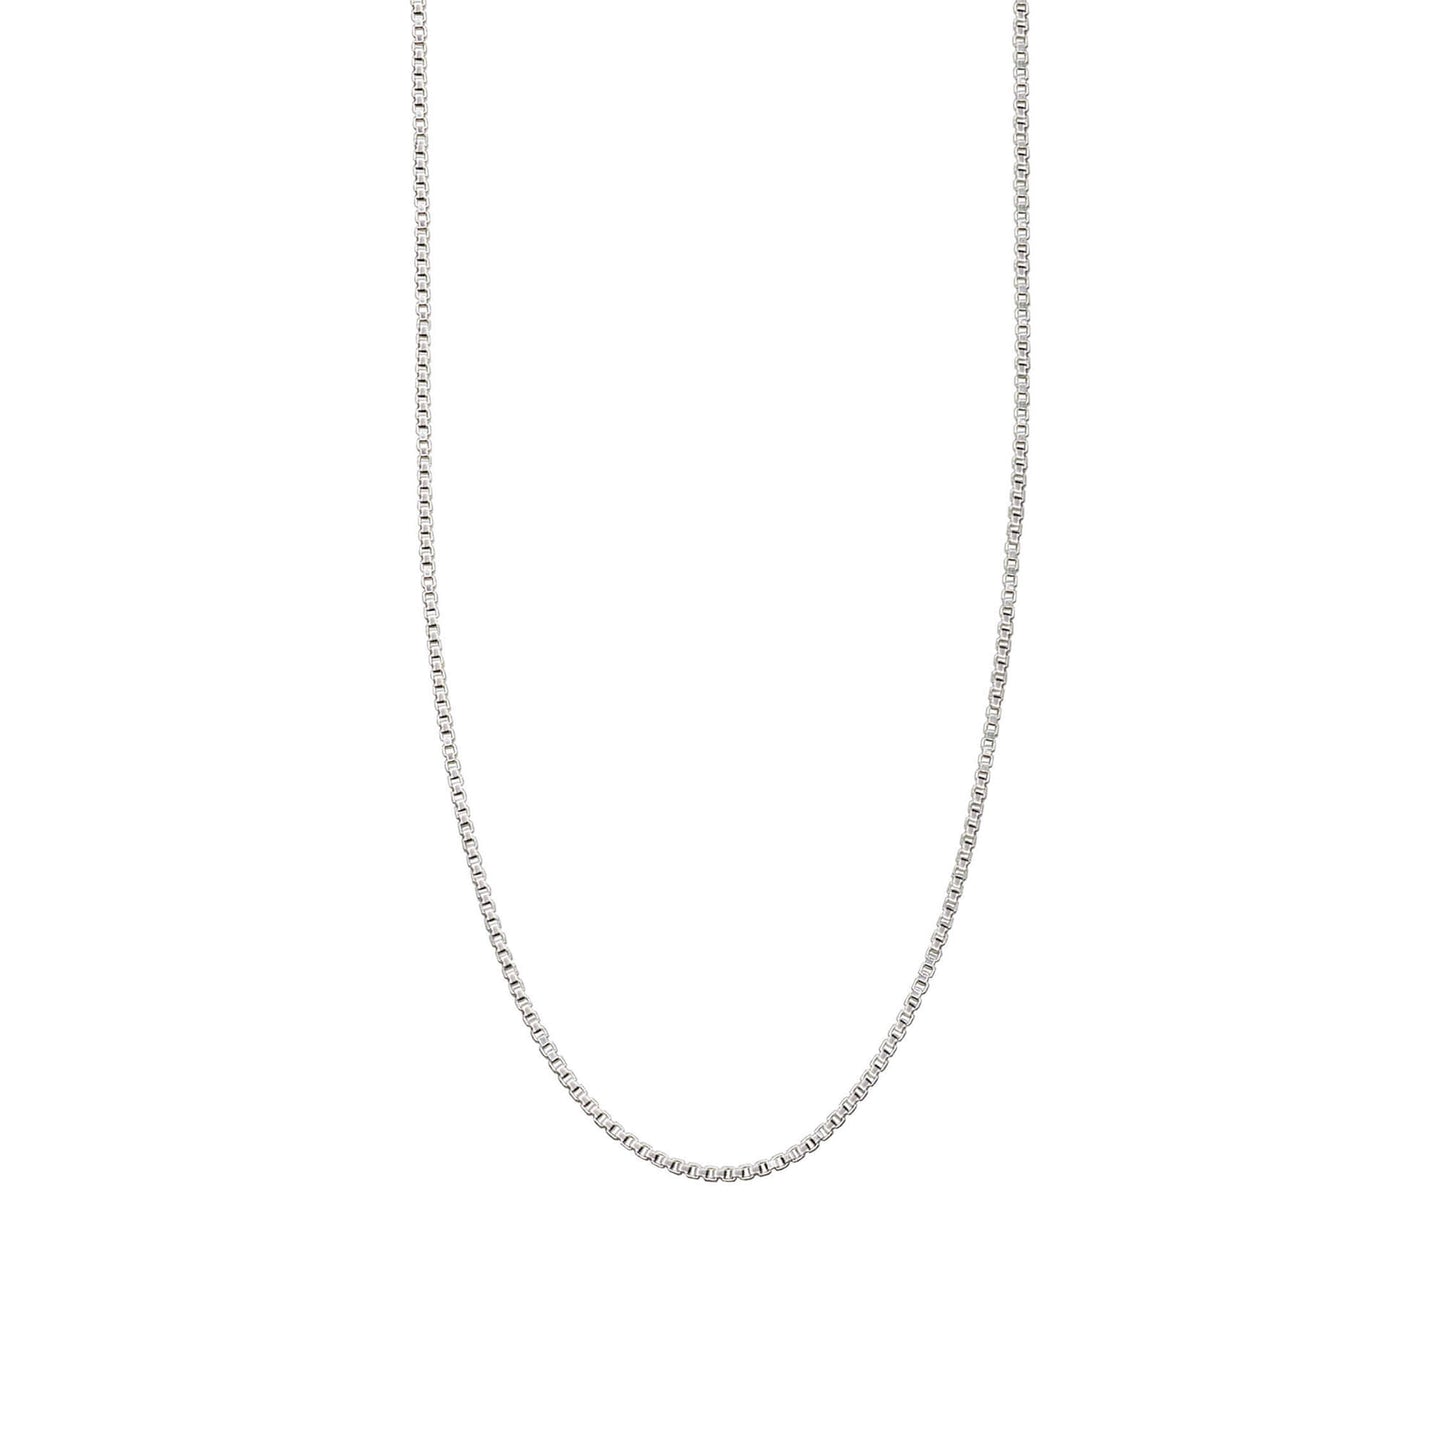 STERLING SILVER ROUND CURB CHAIN 1.6MM NECKLACE.